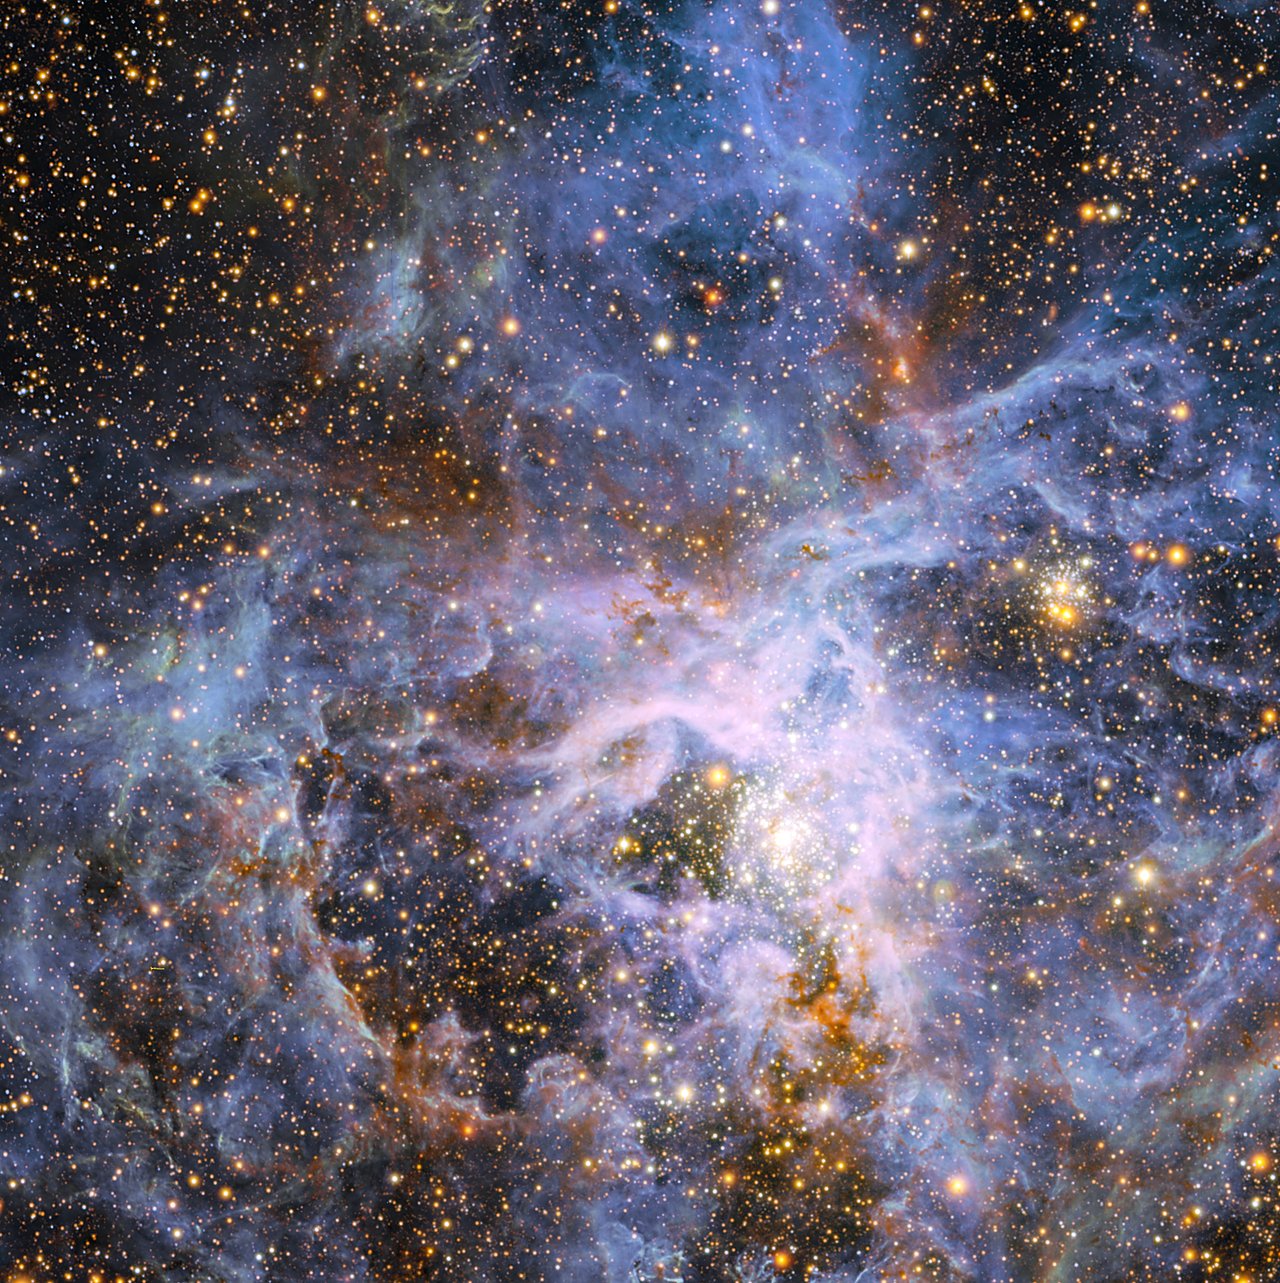 This view shows part of the very active star-forming region around the Tarantula Nebula in the Large Magellanic Cloud, a small neighbour of the Milky Way. At the exact centre lies the brilliant but isolated star VFTS 682 and to its lower right the very rich star cluster R 136. The origins of VFTS 682 are unclear — was it ejected from R 136 or did it form on its own? The star appears yellow-red in this view, which includes both visible-light and infrared images from the Wide Field Imager at the 2.2-metre MPG/ESO telescope at La Silla and the 4.1-metre infrared VISTA telescope at Paranal, because of the effects of dust.